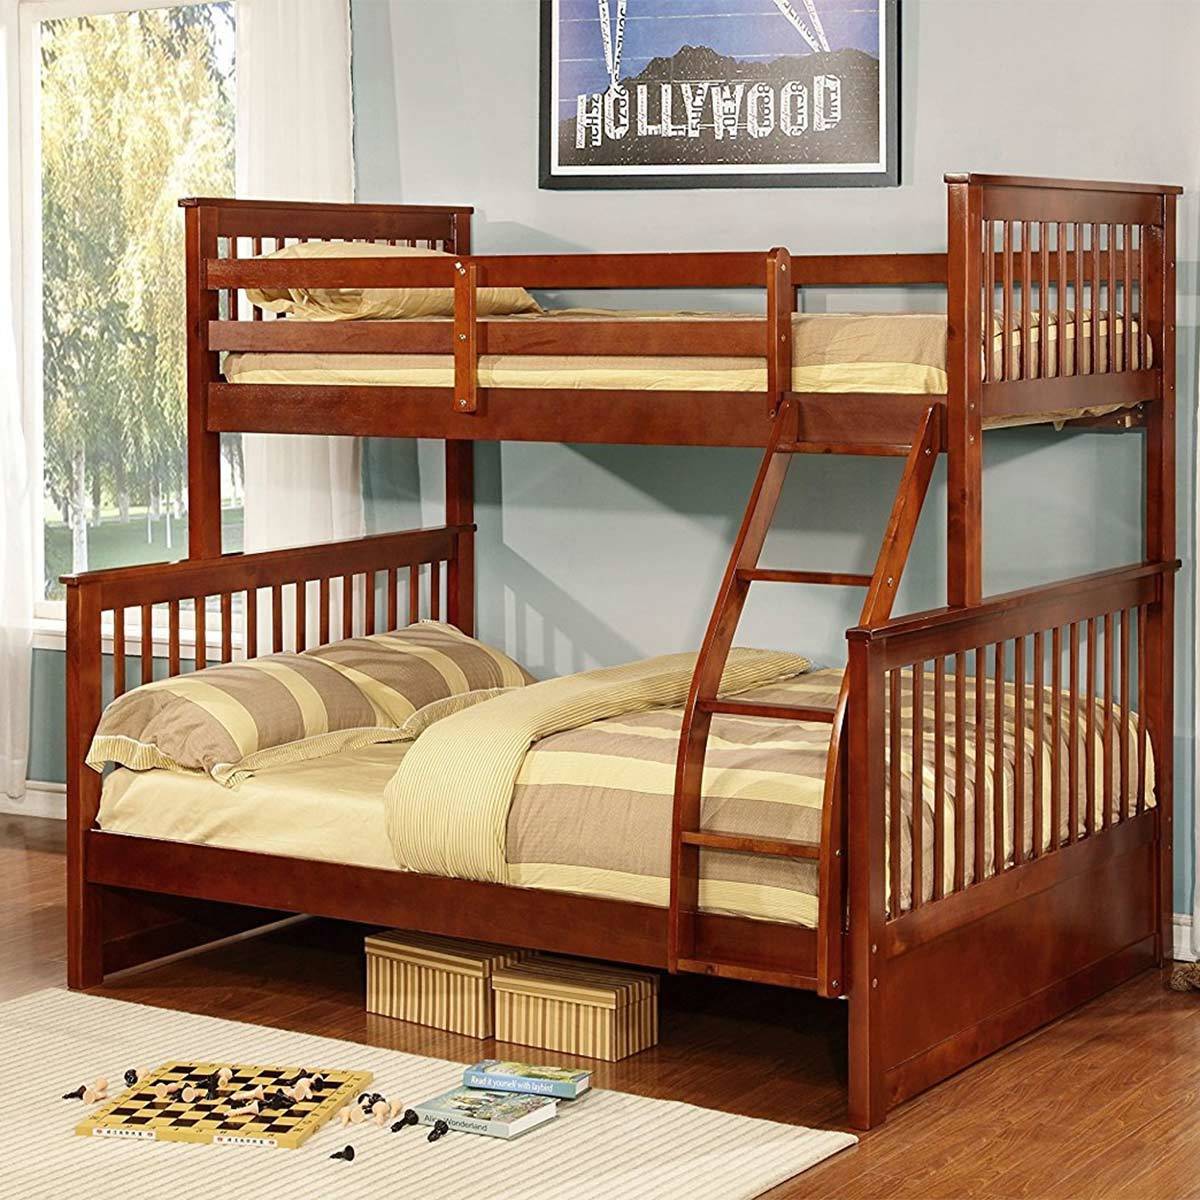 Sturdy Bunk Beds for Adults Are a Good Investment